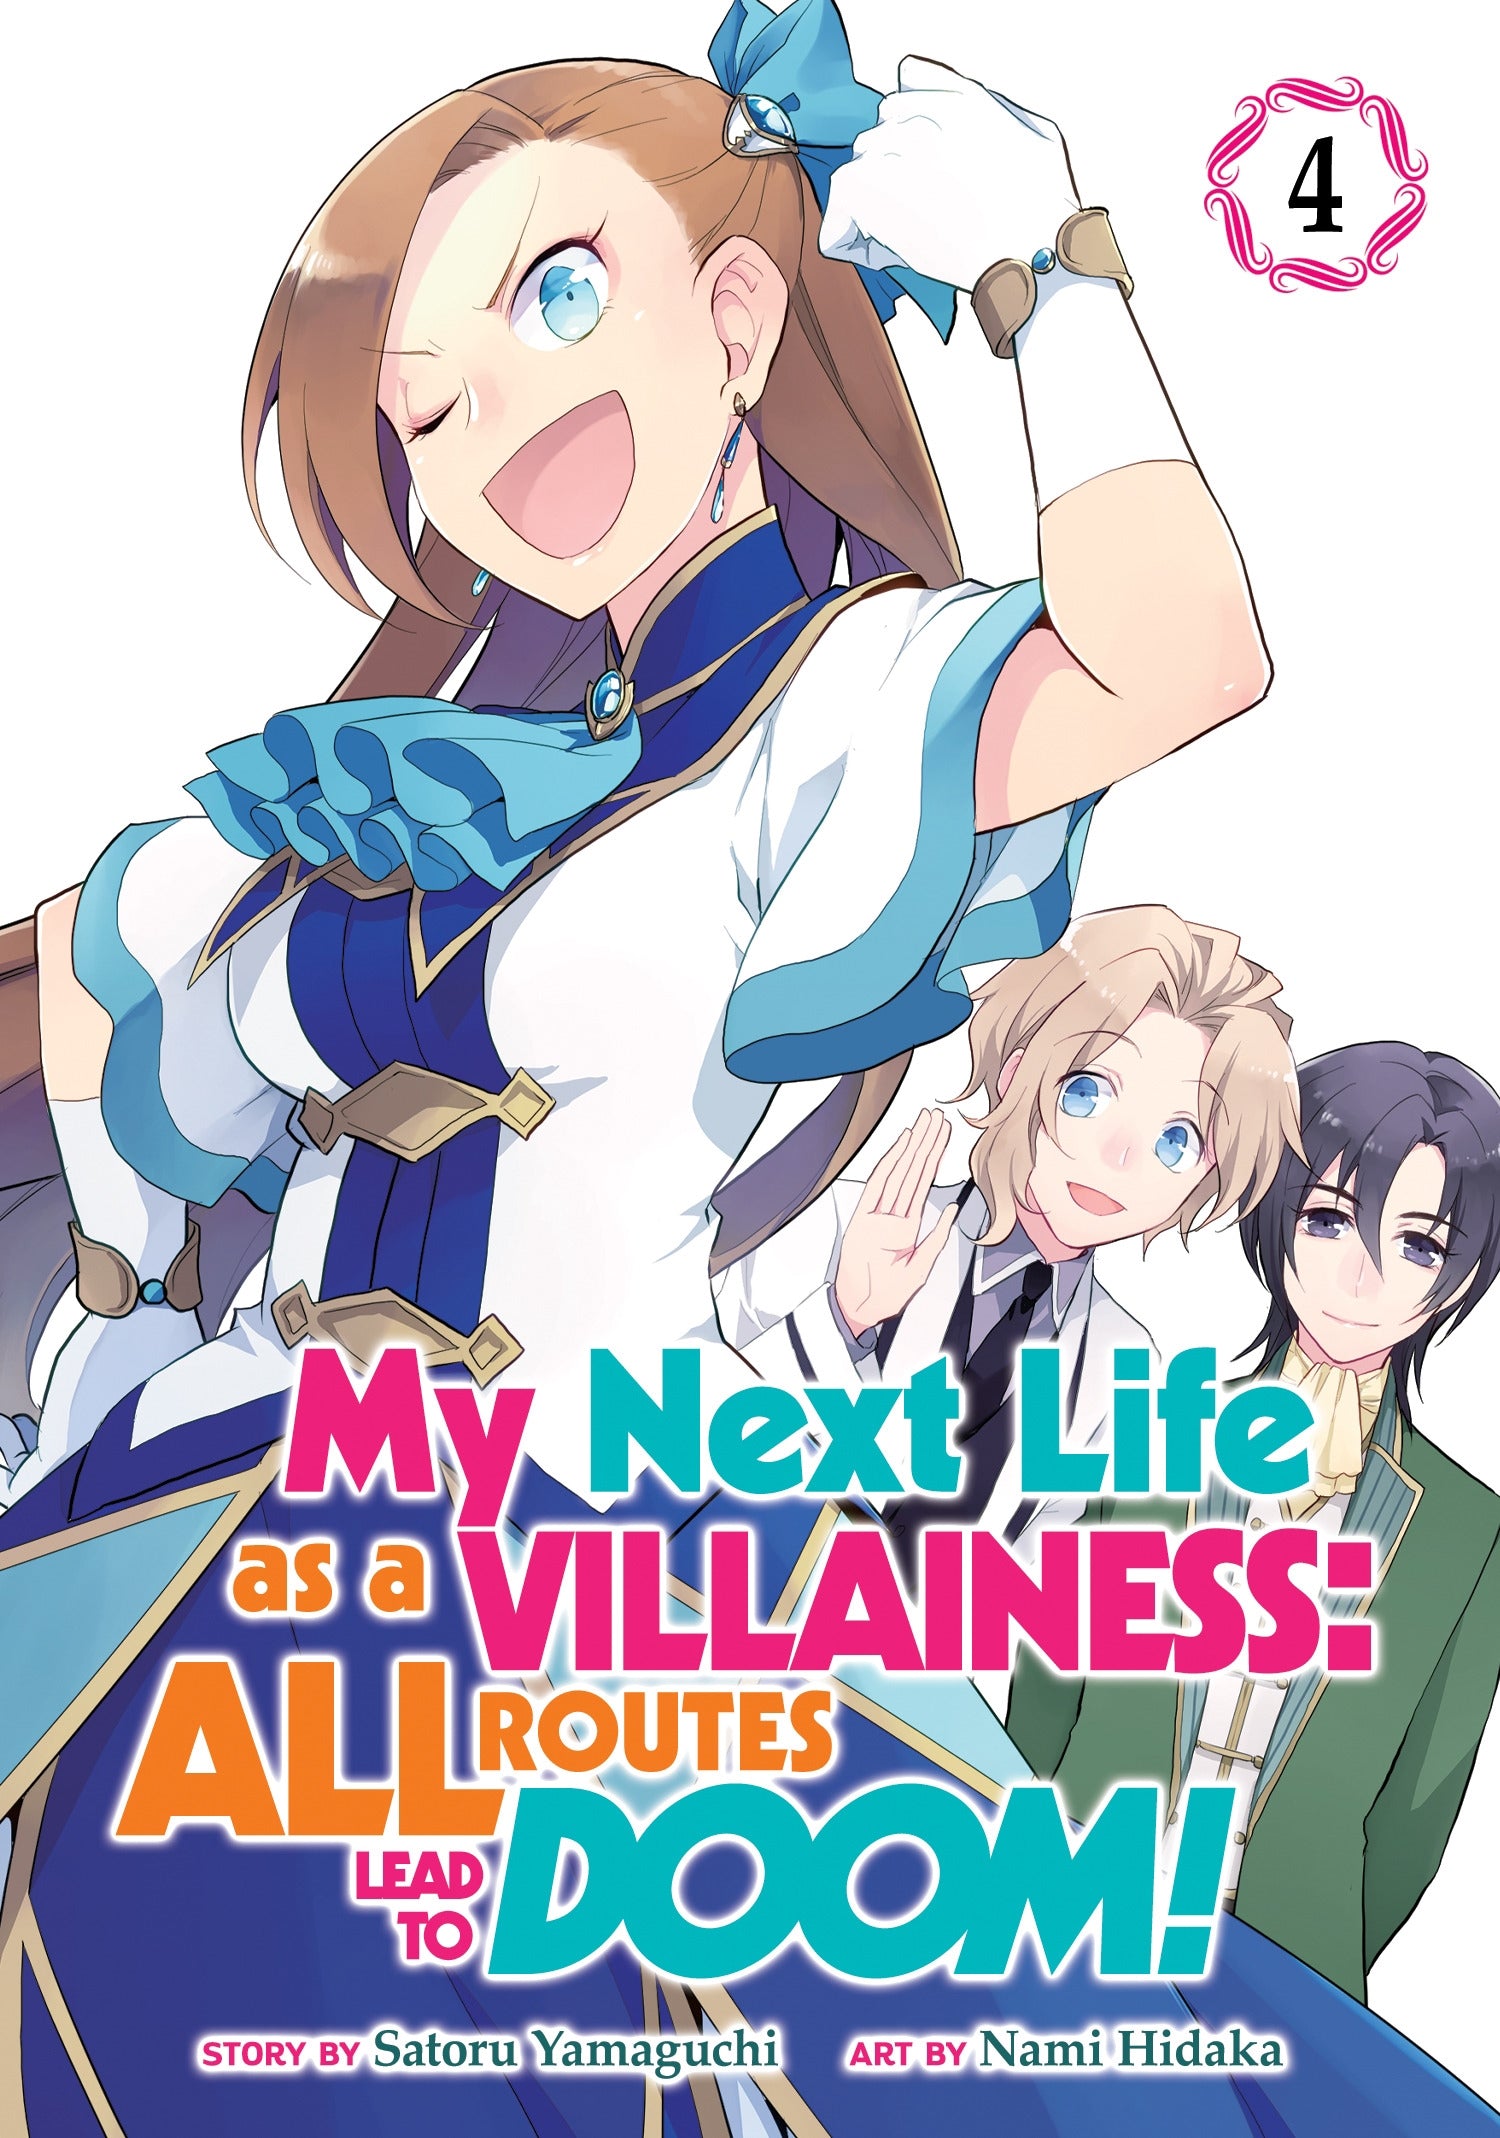 My Next Life as a Villainess All Routes Lead to Doom! (Manga) Vol. 4